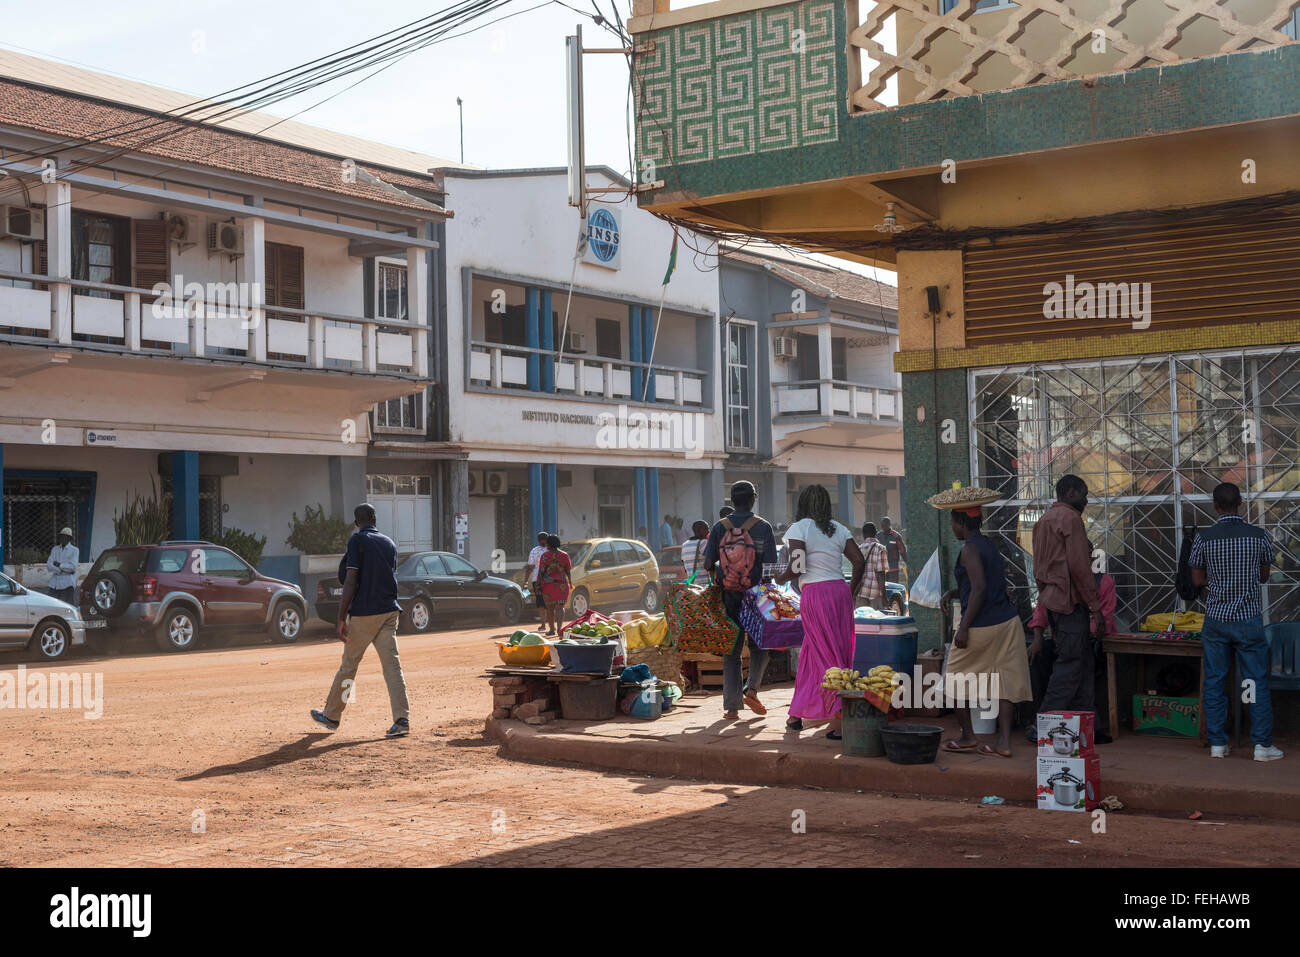 A street with market traders in the Guinea Bissau capital city of Bissau Stock Photo